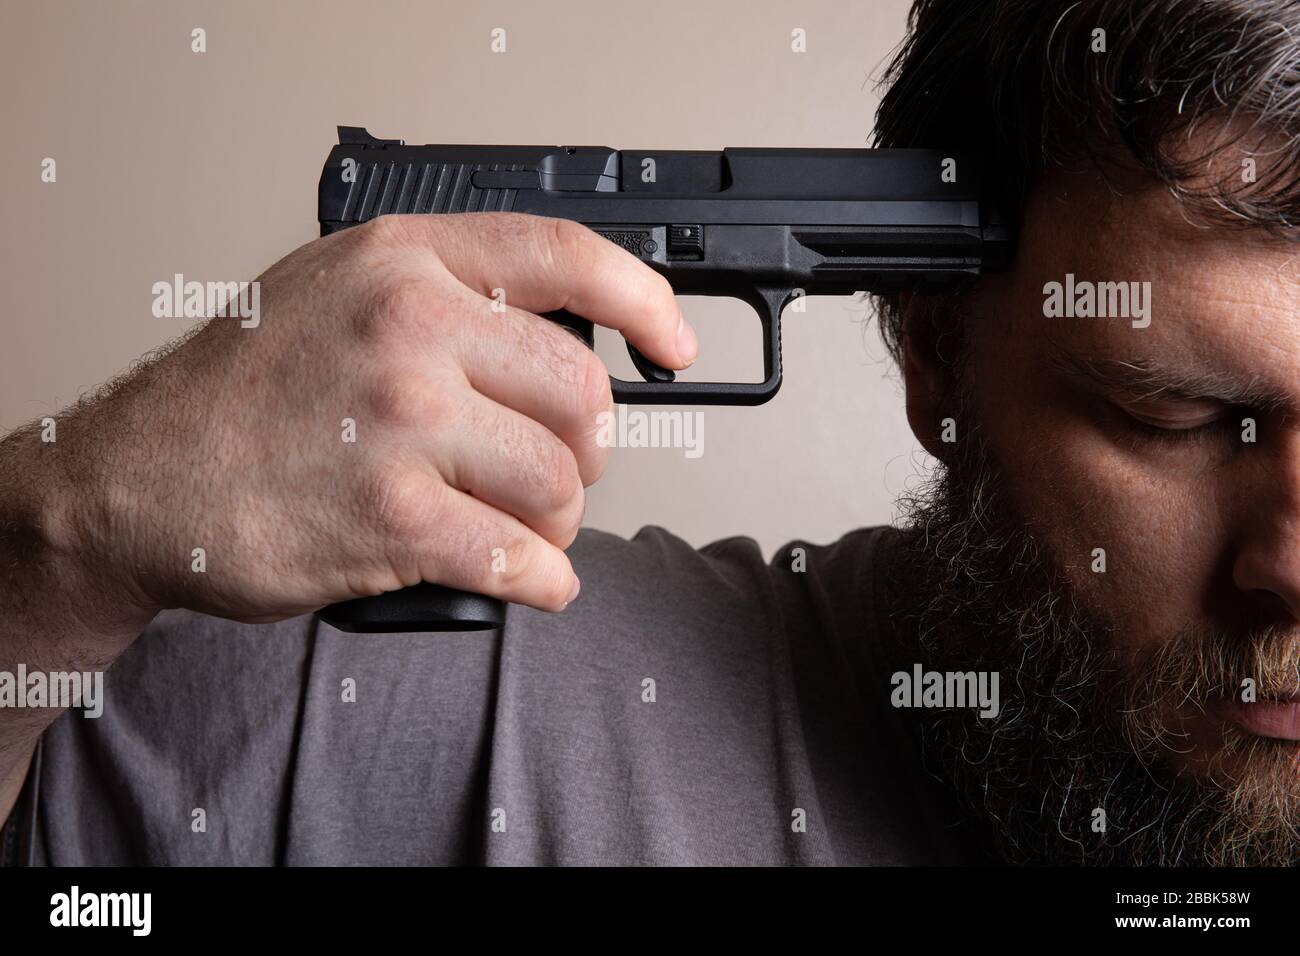 man with his head down holding a gun to end it Stock Photo